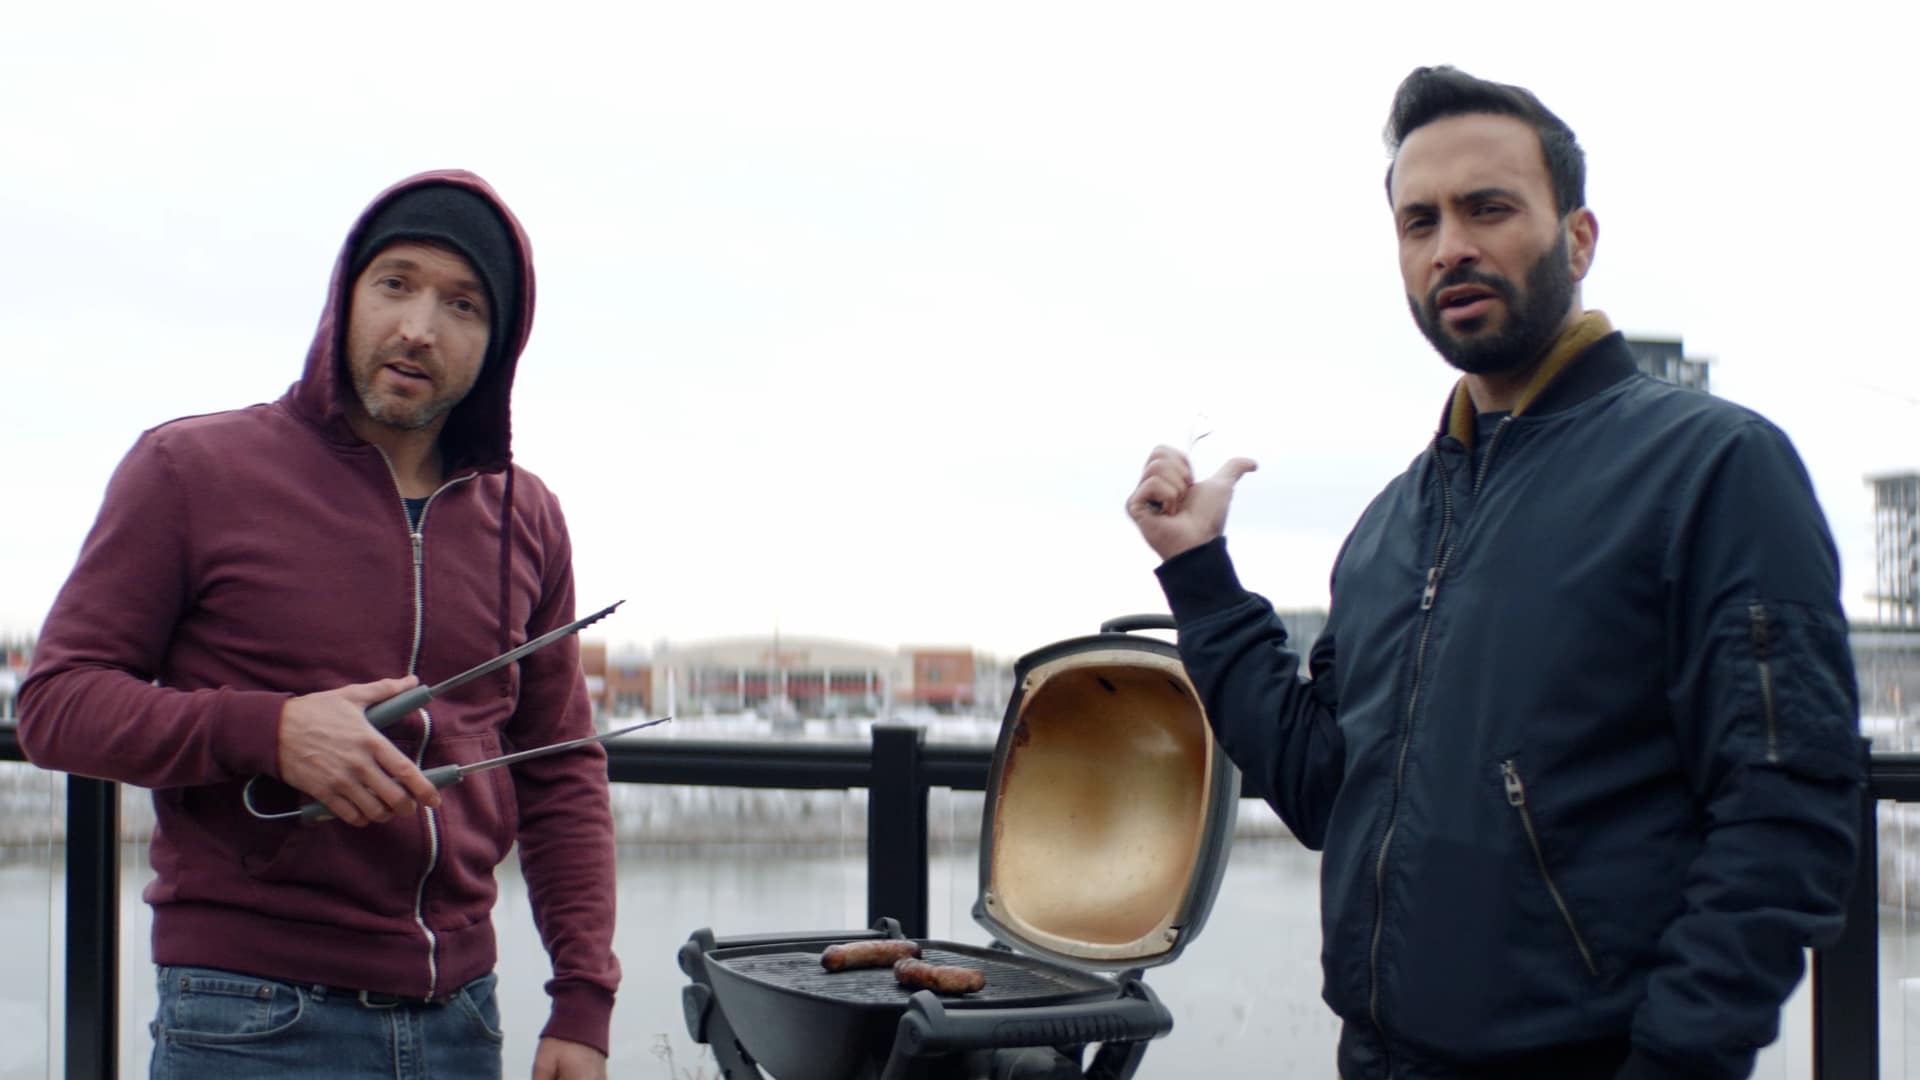 Two men standing over a BBQ, grilling sausages